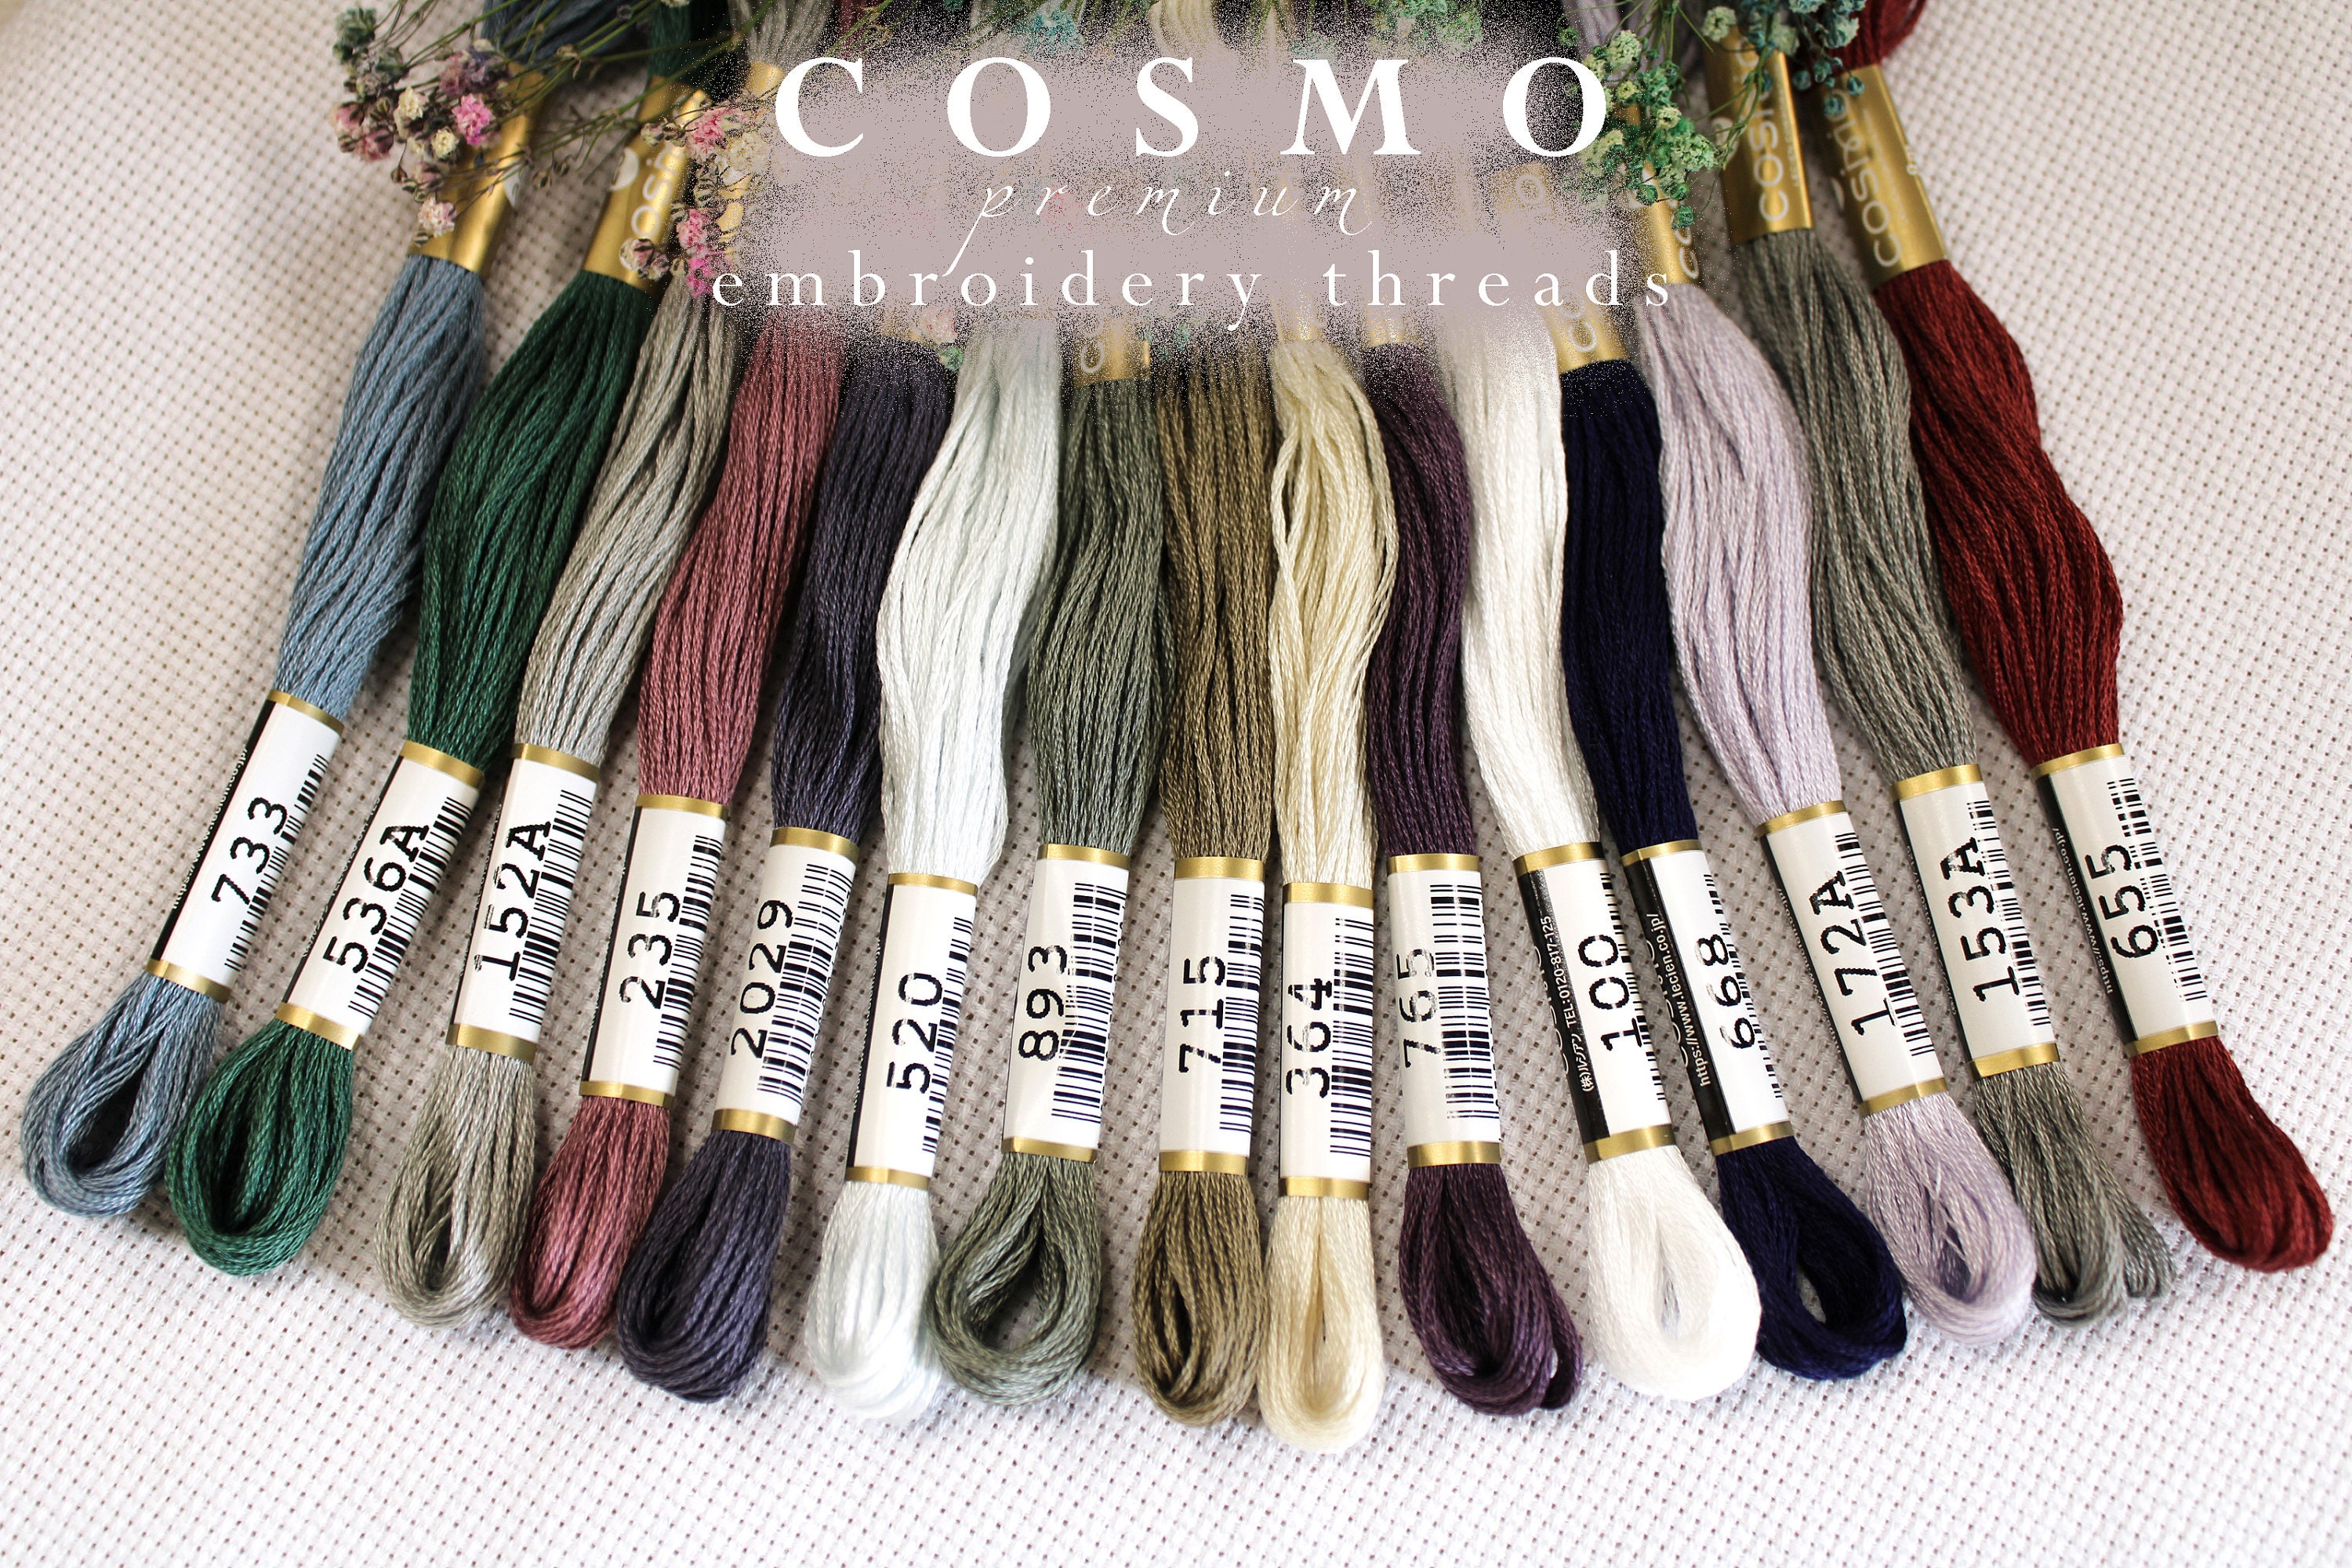 Kyoto Embroidery Thread Non-Twisted Flat Silk Embroidery Thread - 60 Colors Set - Import from Kyoto Japan